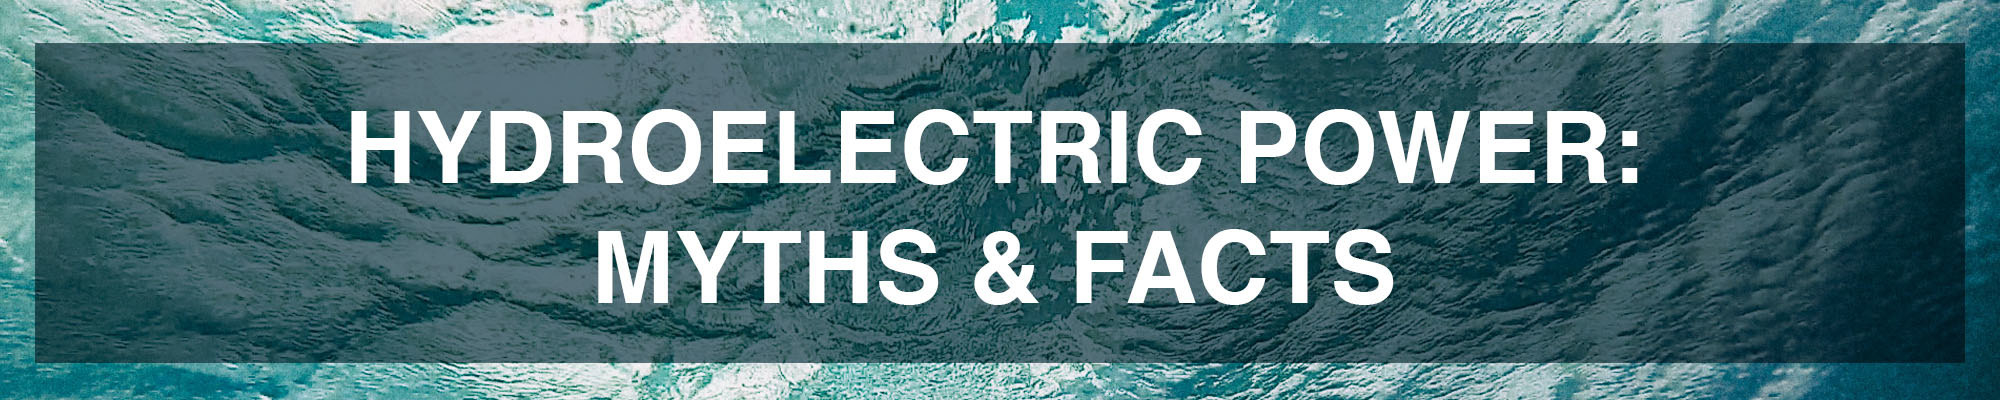 Breaker headline reading: &quot;Hydroelectric Power: Myths &amp; Facts&quot;